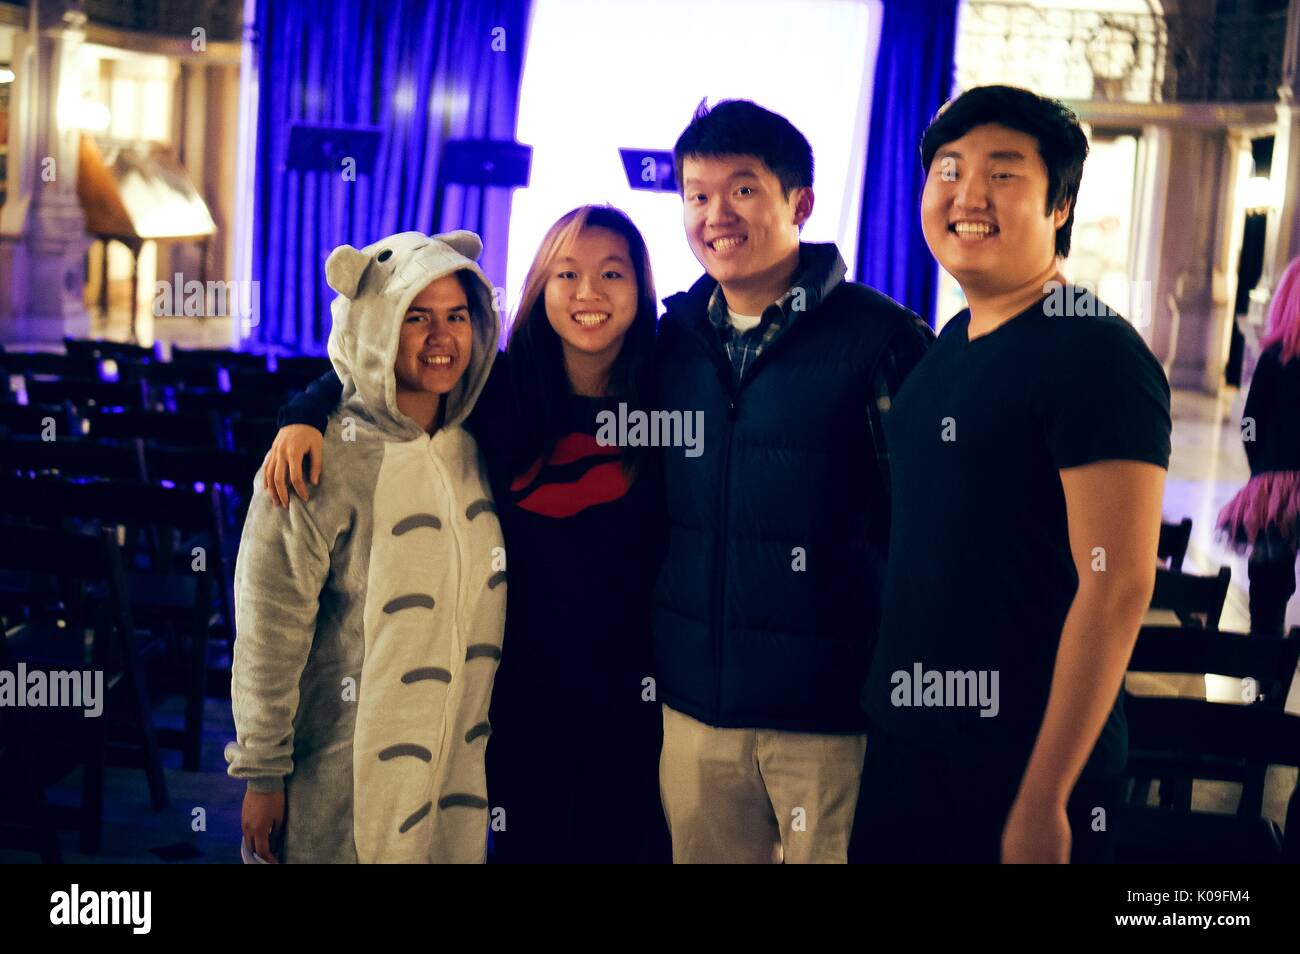 Four college students pose for a picture, the girl on the far left is in a onesie animal costume and the girl next to her is wearing all black except for large red lips on her shirt, the two boys do not appear to be in costume, 2015. Courtesy Eric Chen. Stock Photo